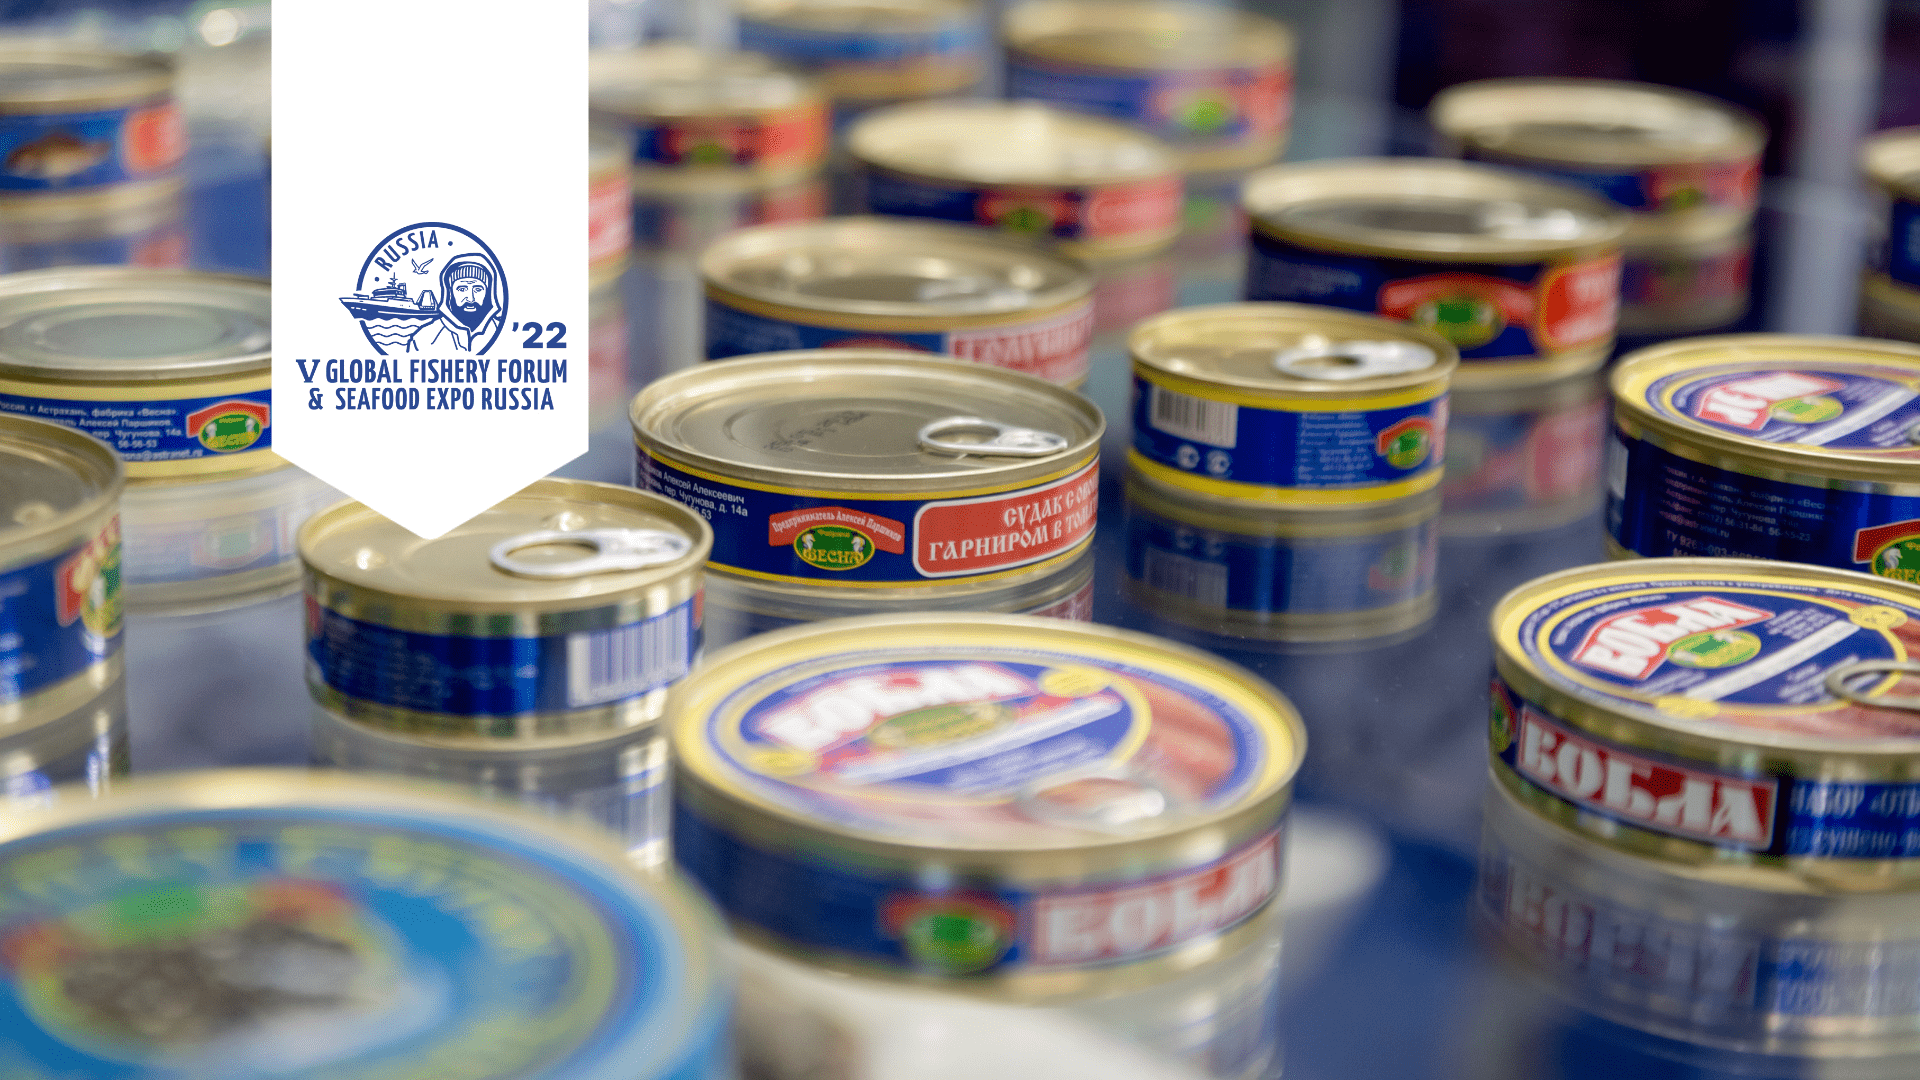 Canned Fish Products to be Discussed within Global Fishery Forum & Seafood Expo Russia 2022